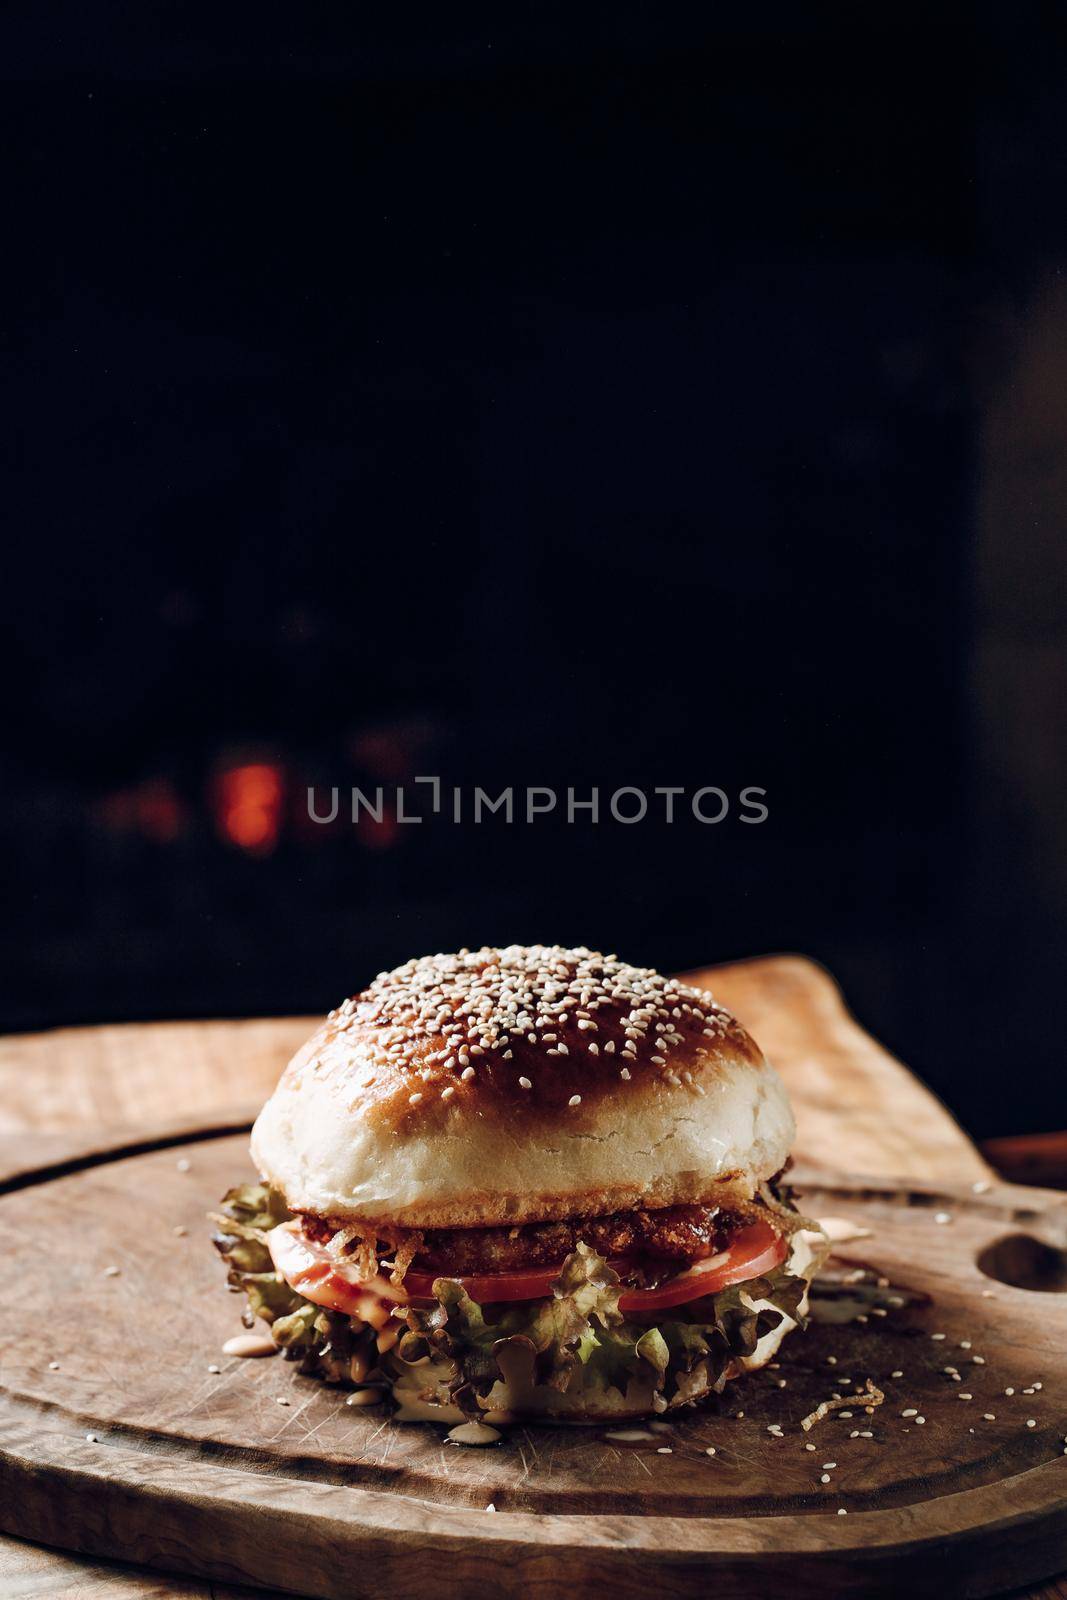 Juicy hamburger on a wooden stand on a black background by Praximon